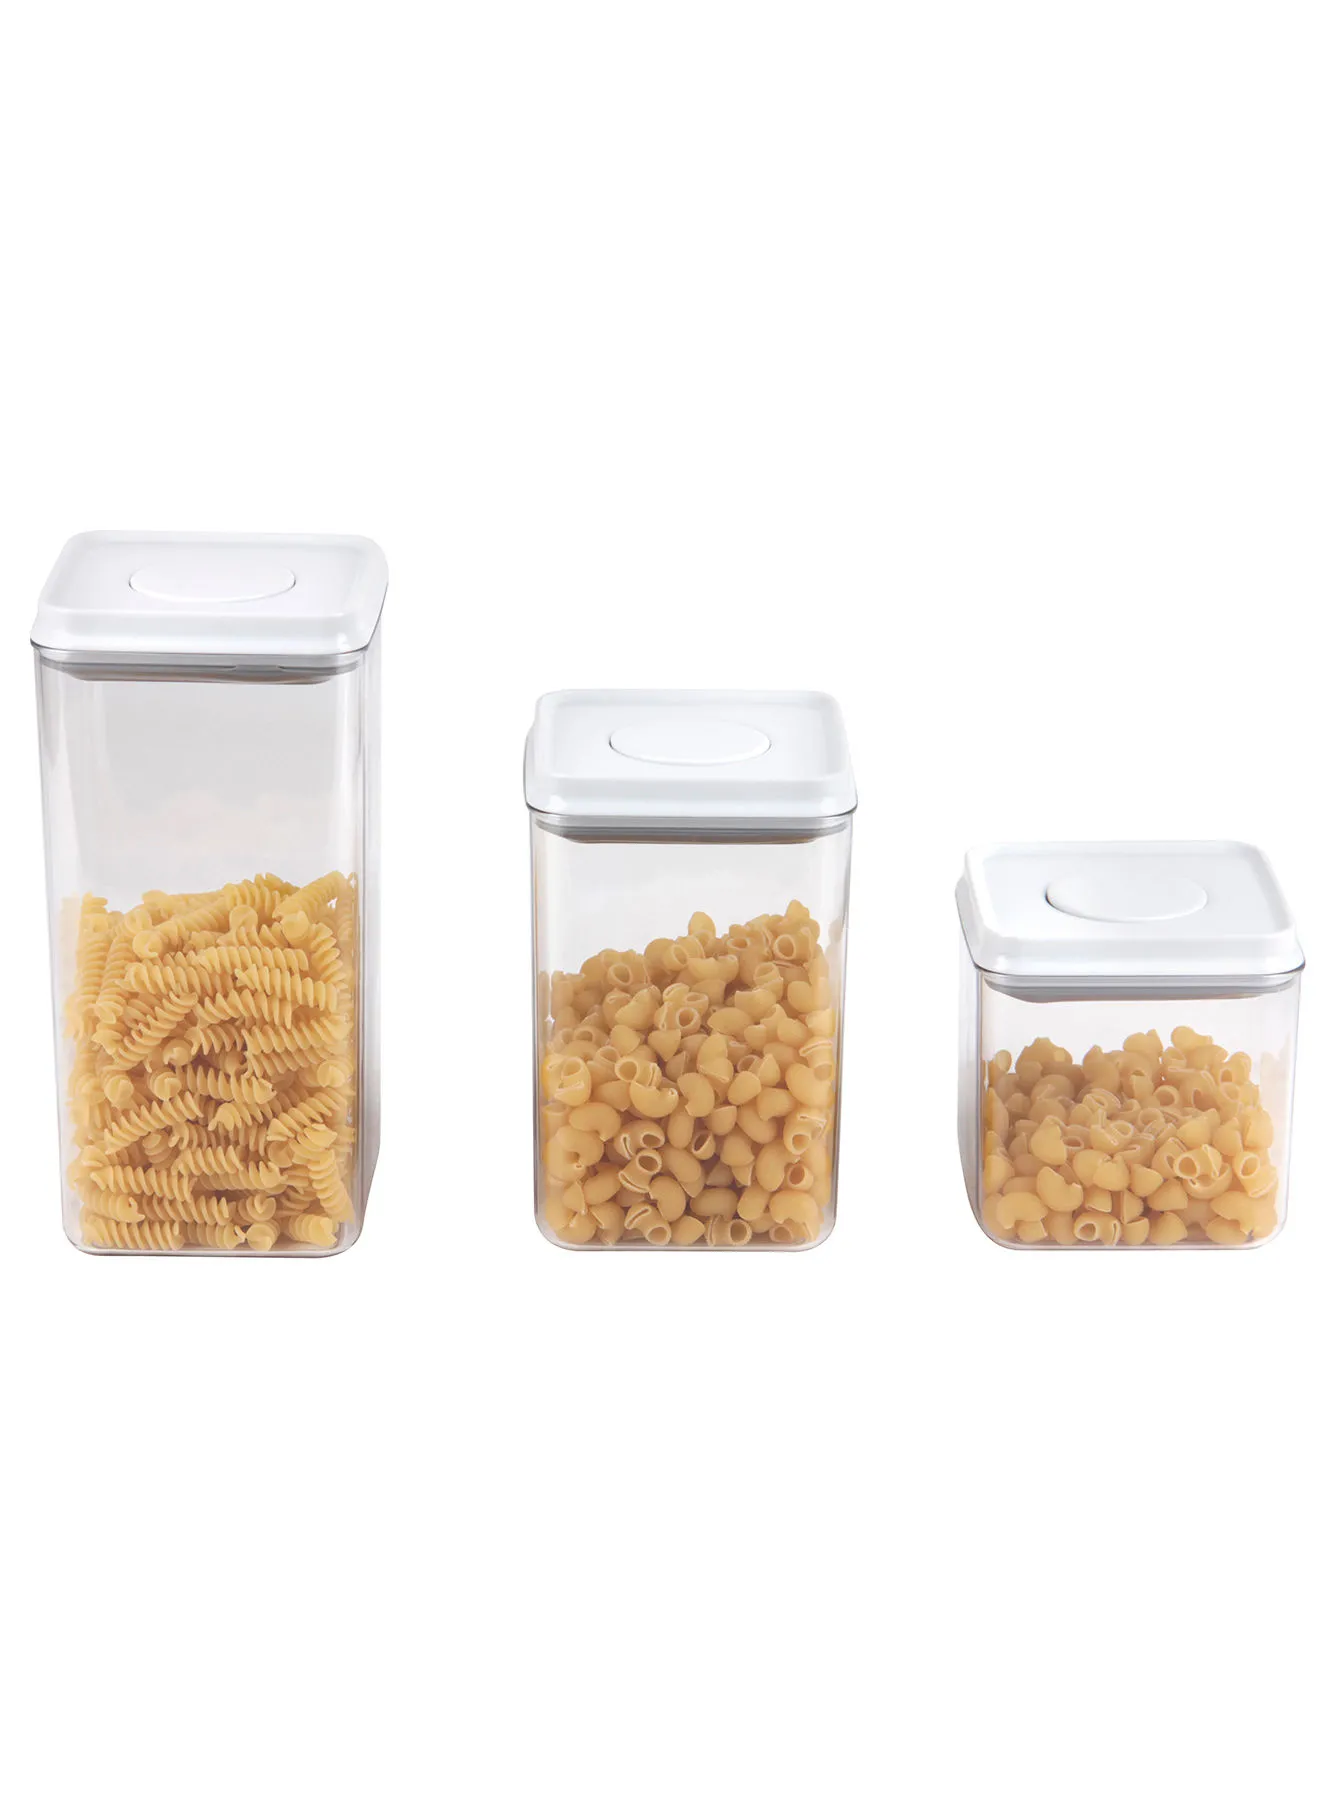 noon east 3 Piece Tritan Food Storage Container Set - Airtight Lids - With Push Button - Food Storage Box - Storage Boxes - Kitchen Cabinet Organizers - Food Container - Clear/White